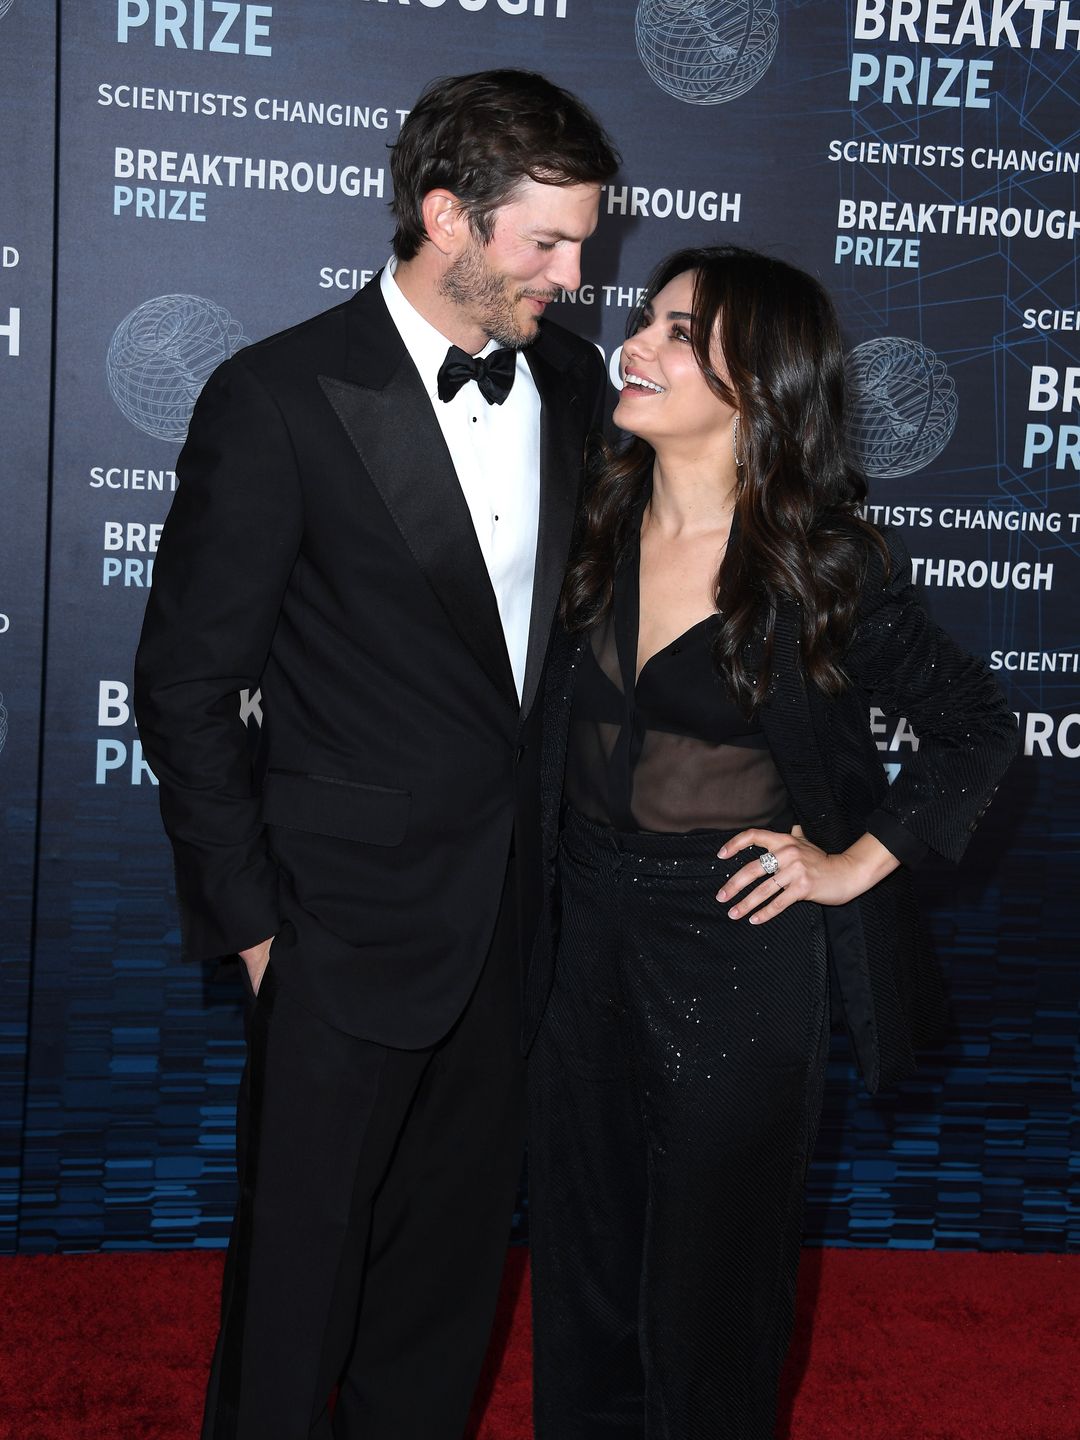 Ashton Kutcher and Mila Kunis smiling at each other on a red carpet